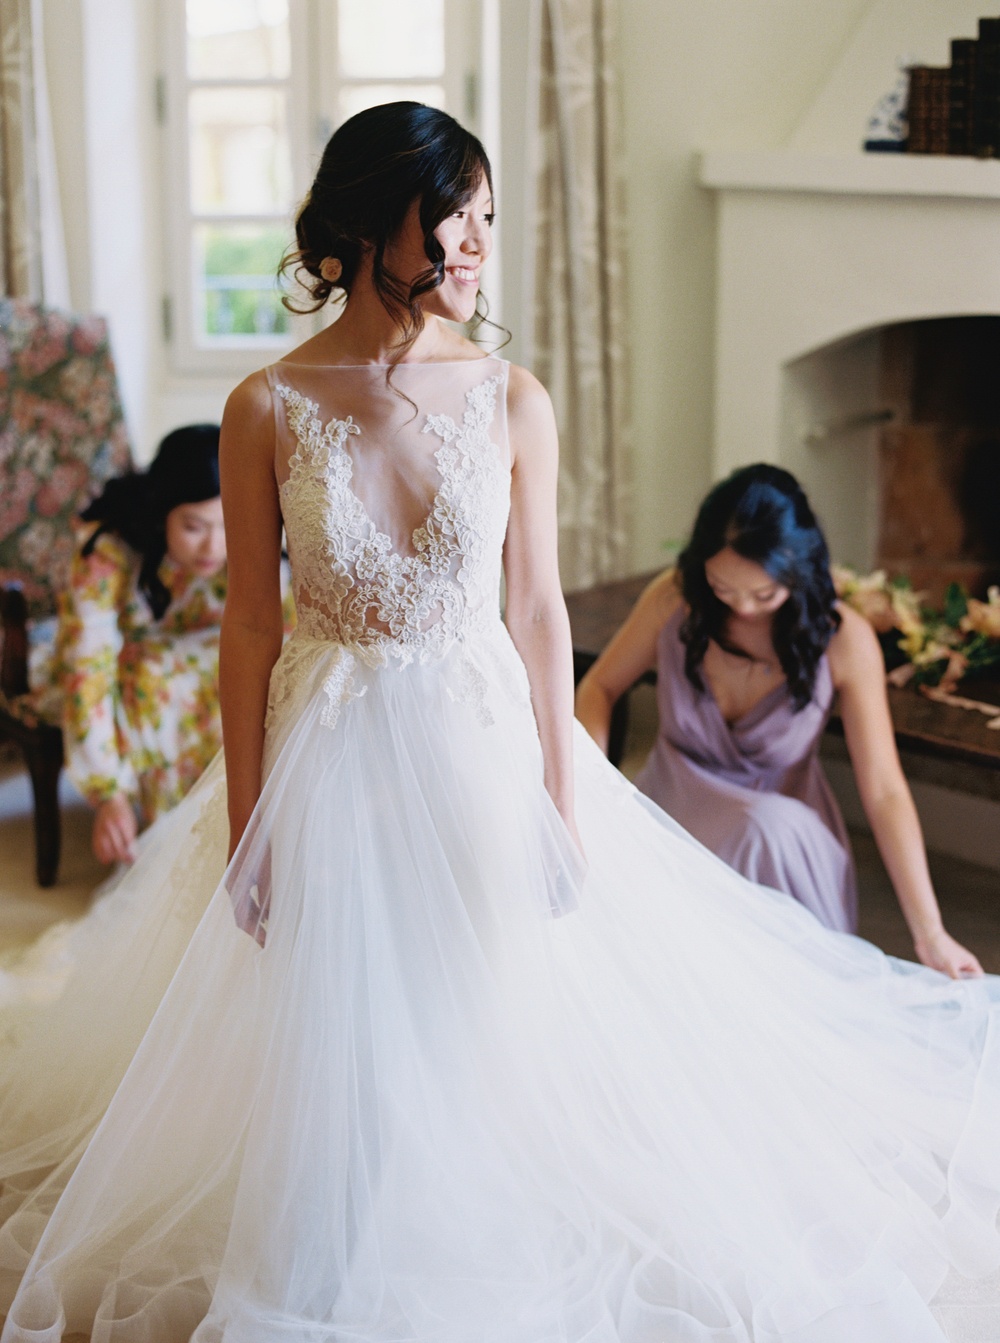 Idyllic Chateau Wedding in the South of France ⋆ Ruffled